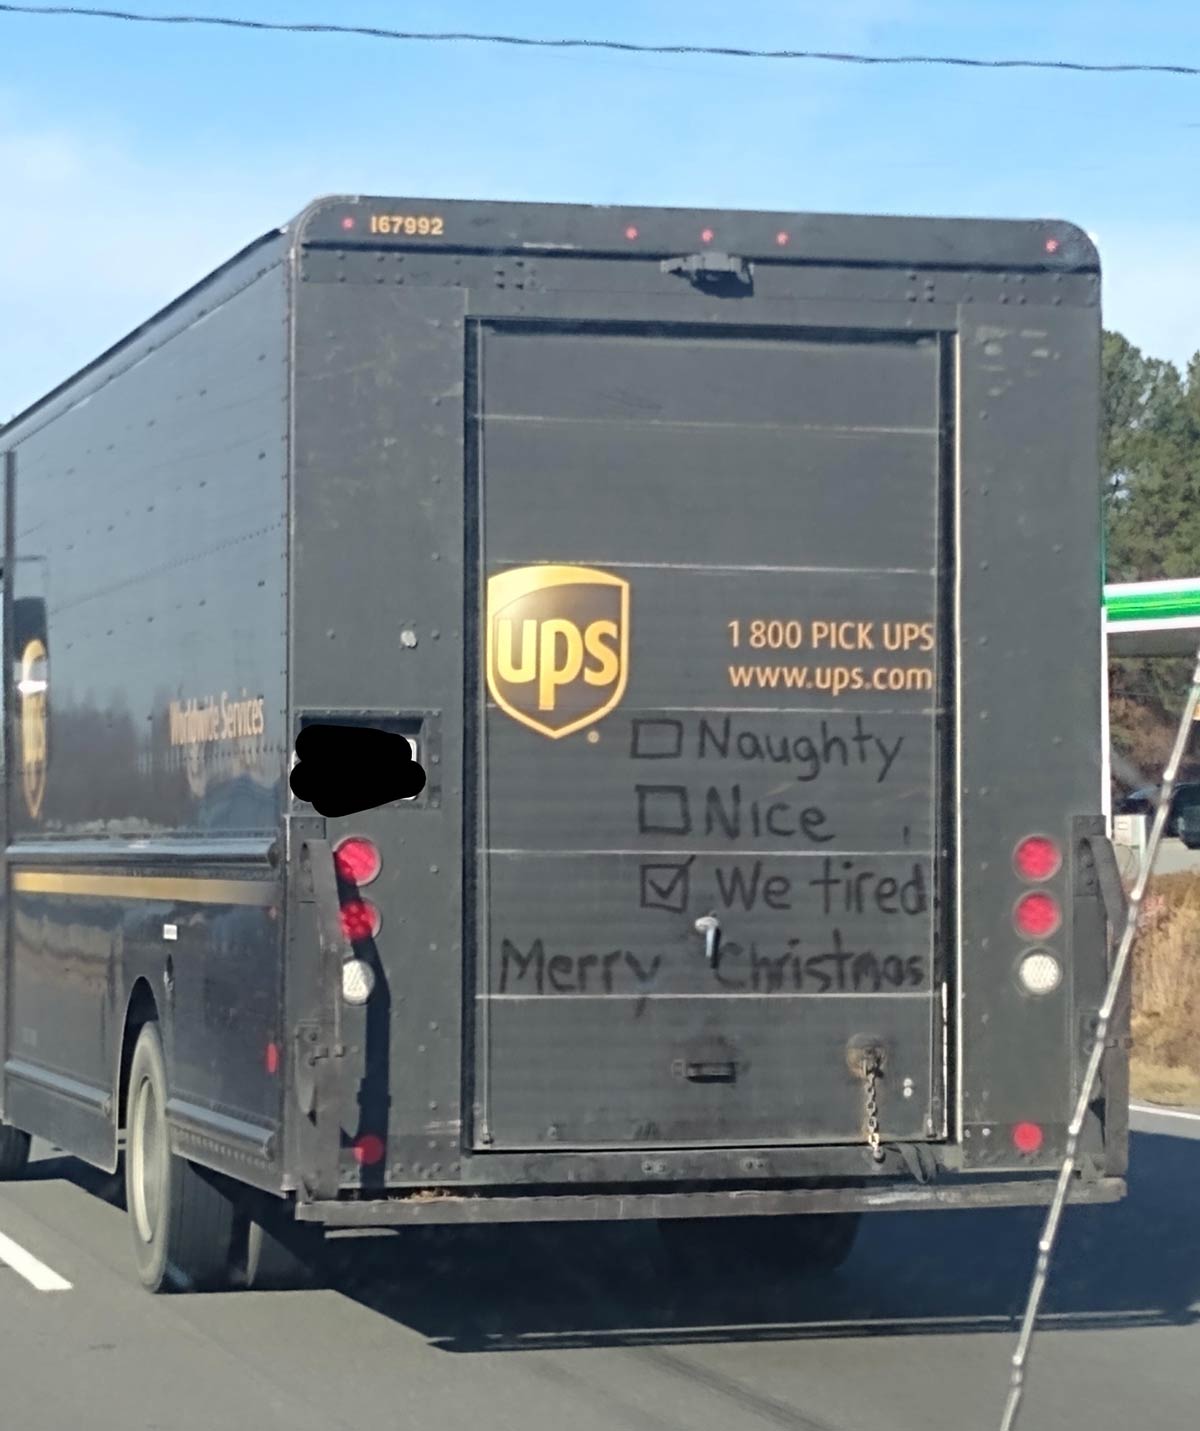 Drove past this poor UPS truck on Christmas Eve in NC